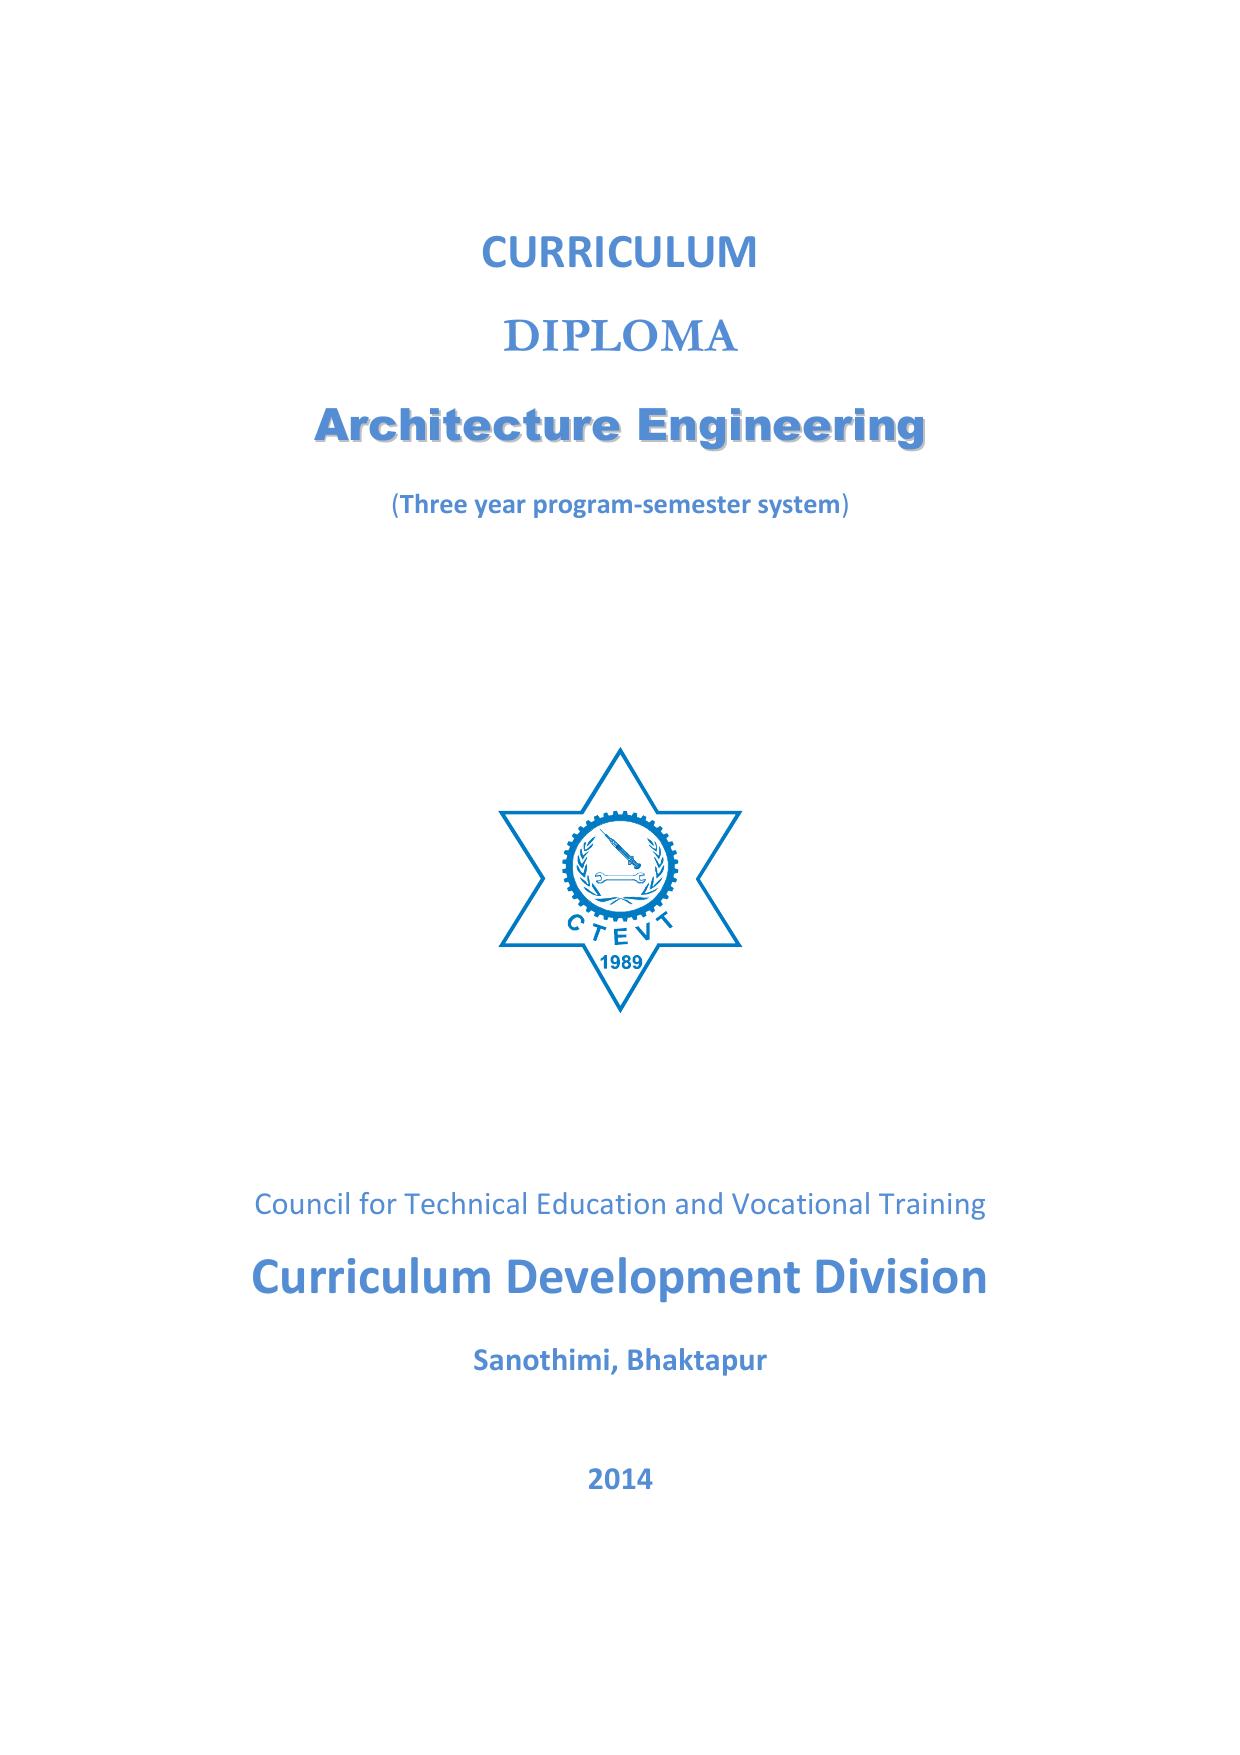 Diploma Architecture Engineering, 2014